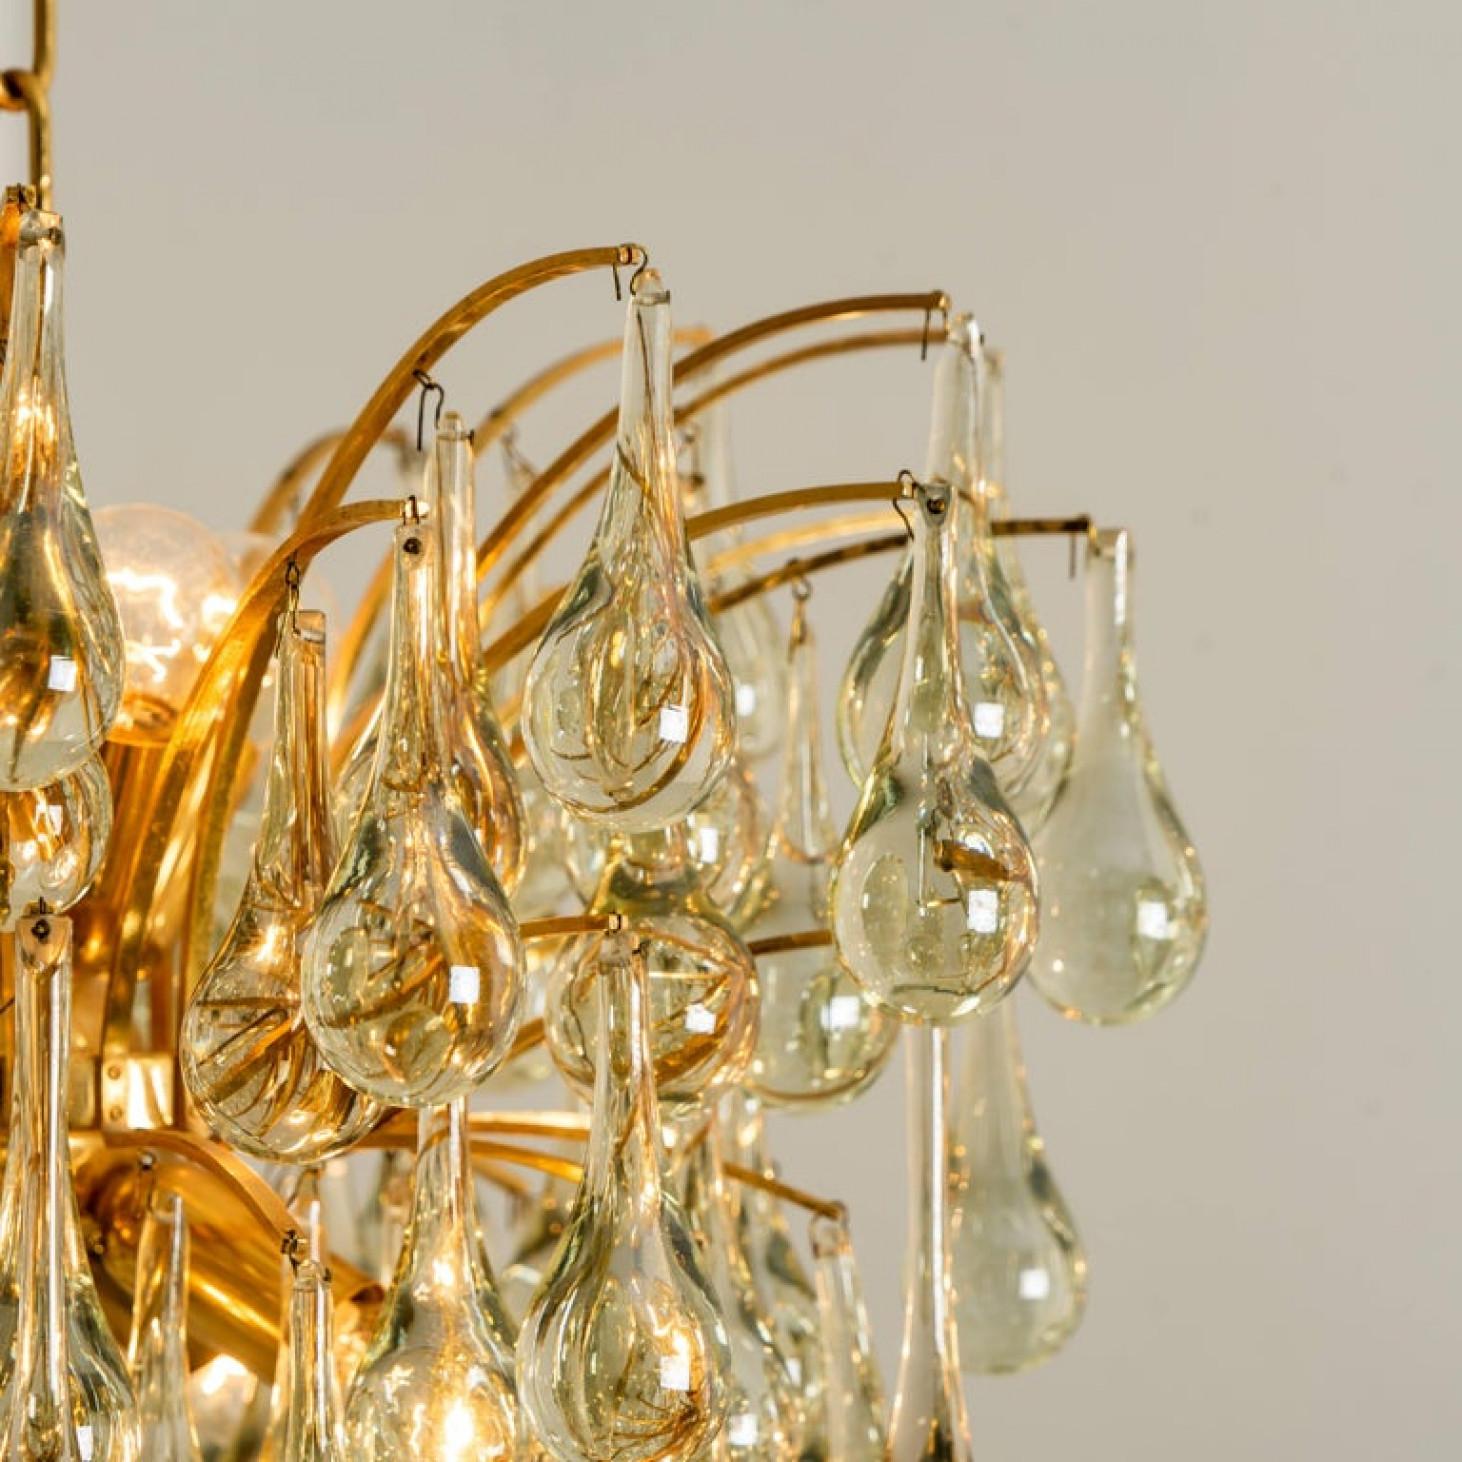 1 of the 2 Large Brass and Crystal Chandeliers, Ernst Palme, Germany, 1970s For Sale 4